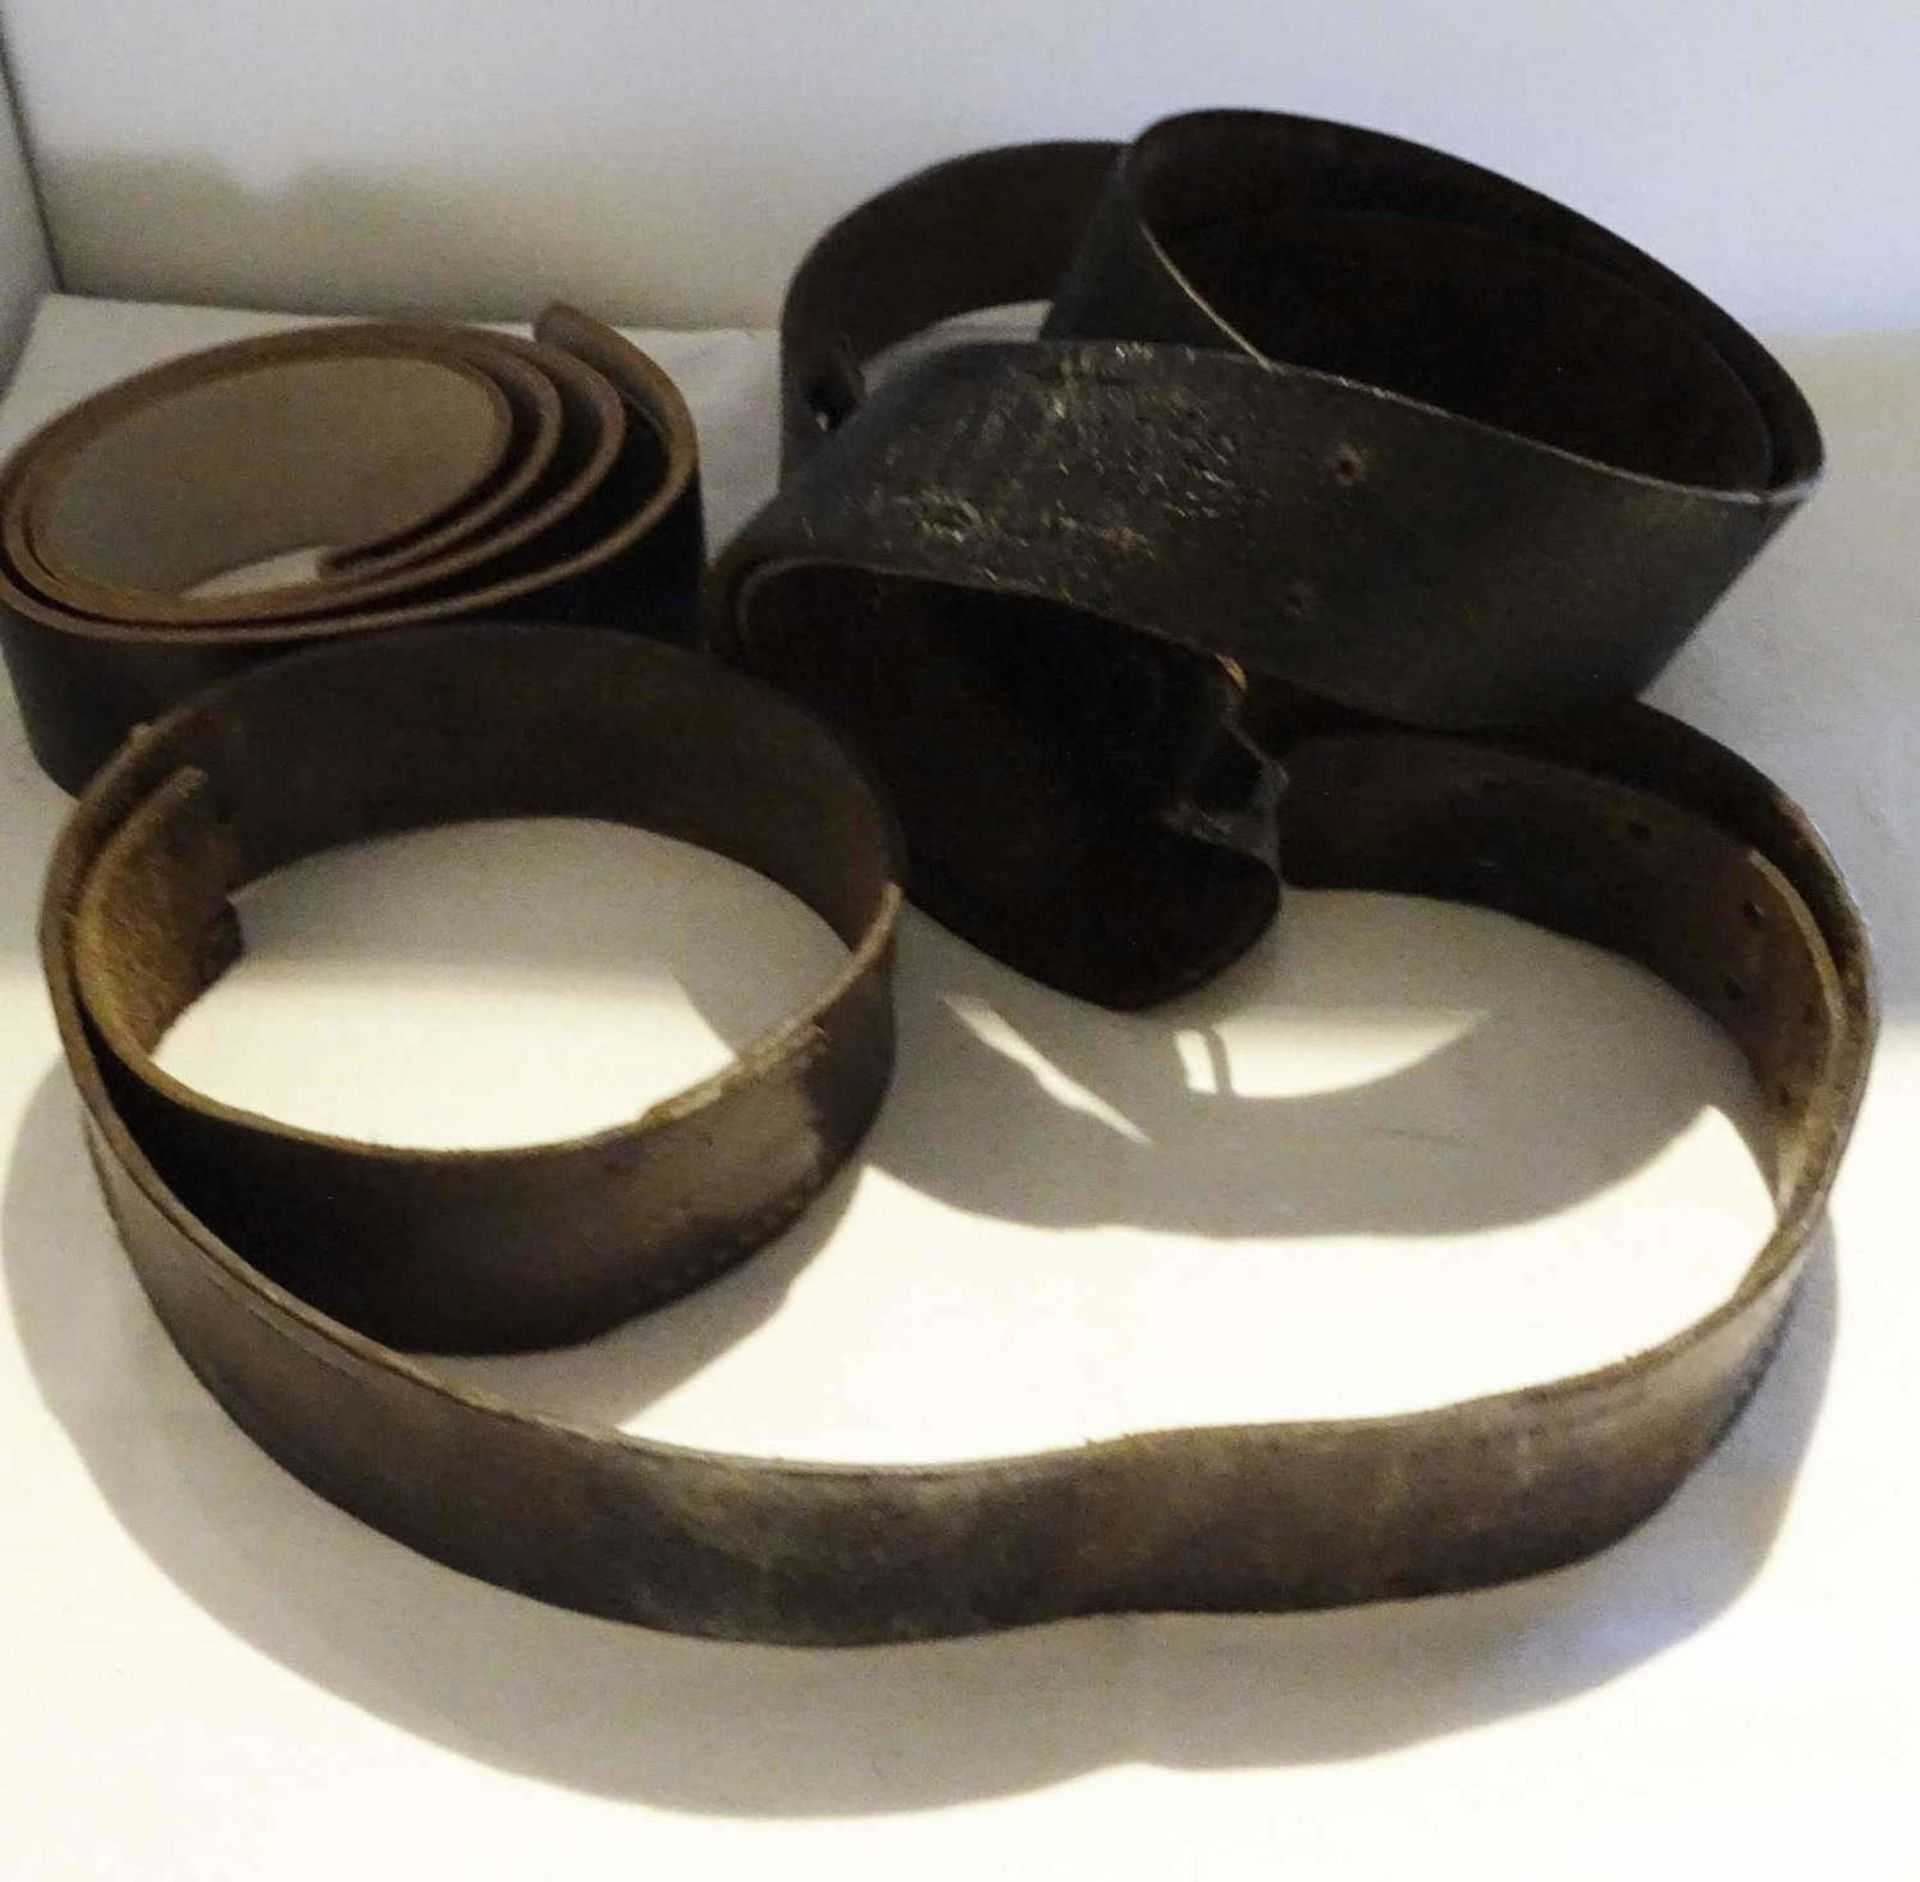 3 ancient leather belt straps, different lengths, probably for the military.